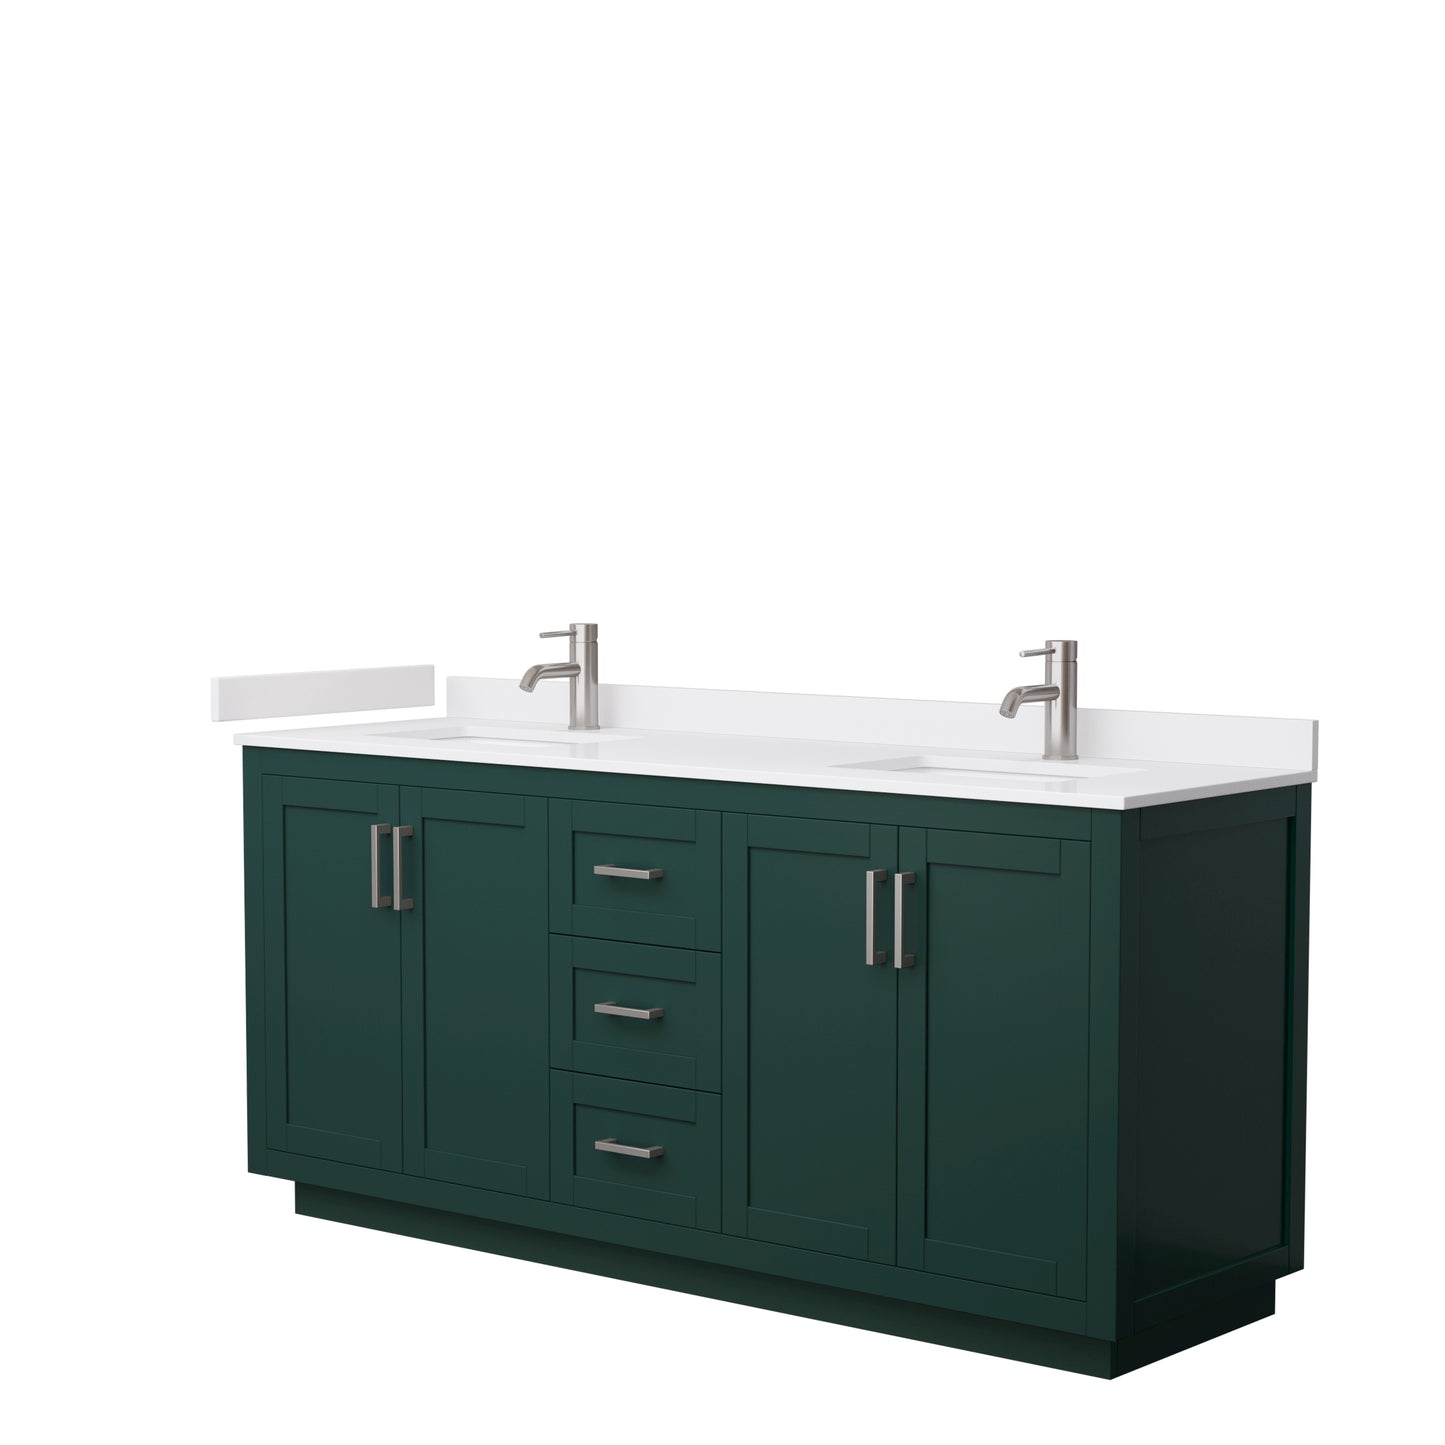 Wyndham Miranda 72 Inch Double Bathroom Vanity in Green with White Cultured Marble Countertop Undermount Square Sinks and Trim - Luxe Bathroom Vanities